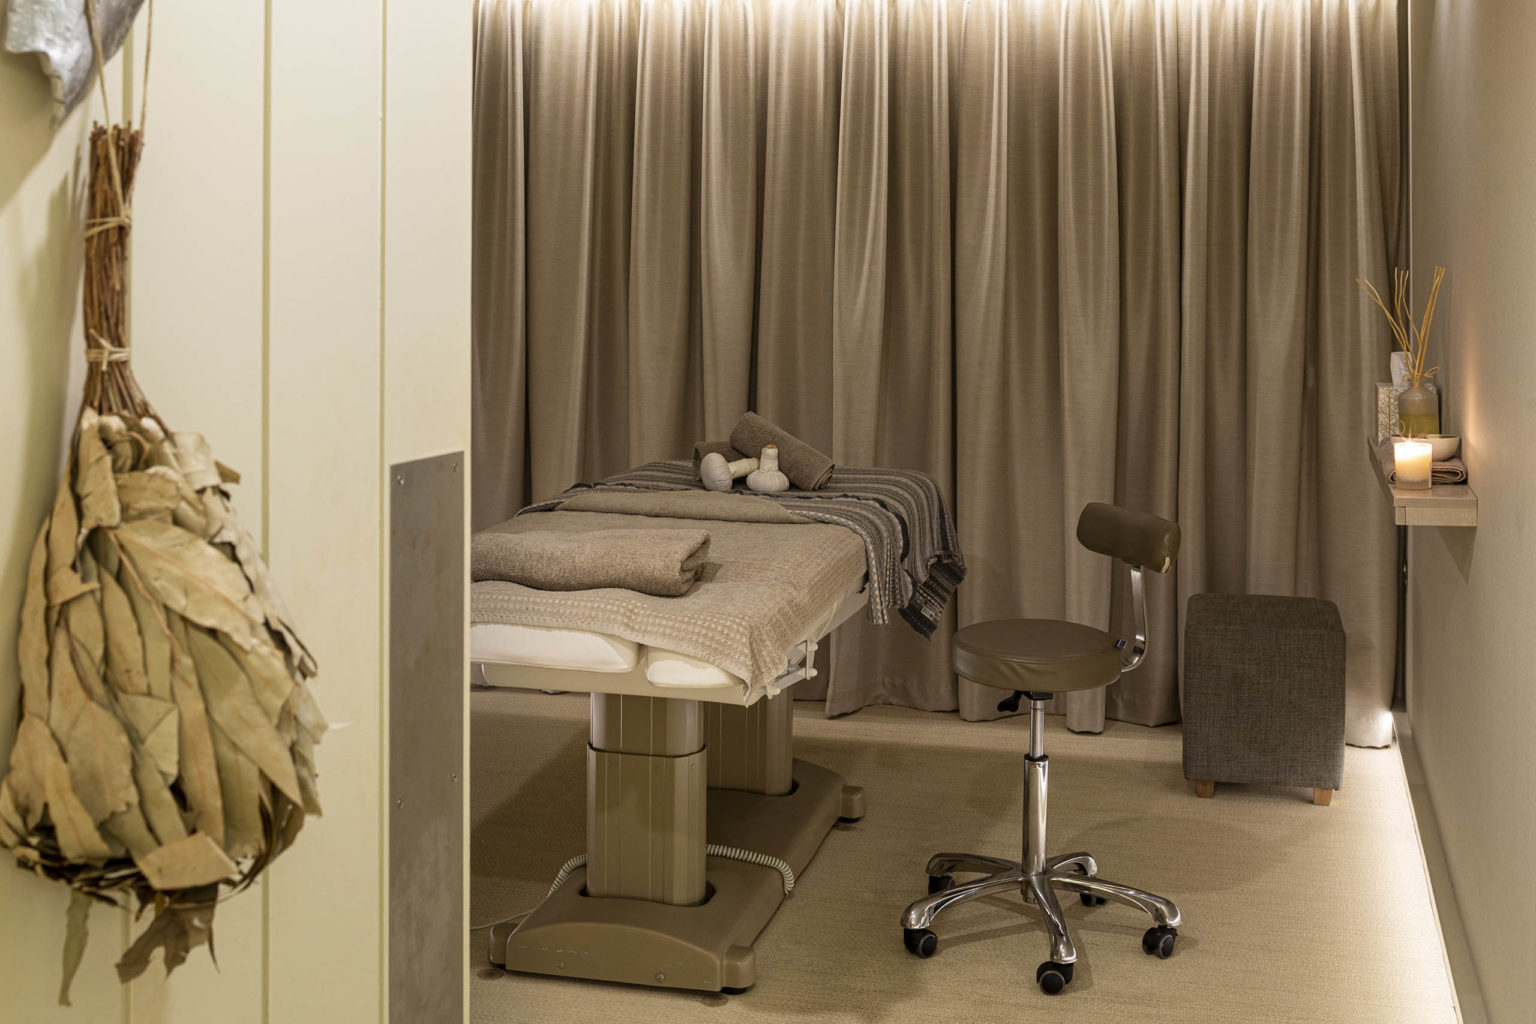 A luxury spa treatment room used for massages, facials and spa days at Swinton Country Club near Harrogate and the Yorkshire Dales in North Yorkshire